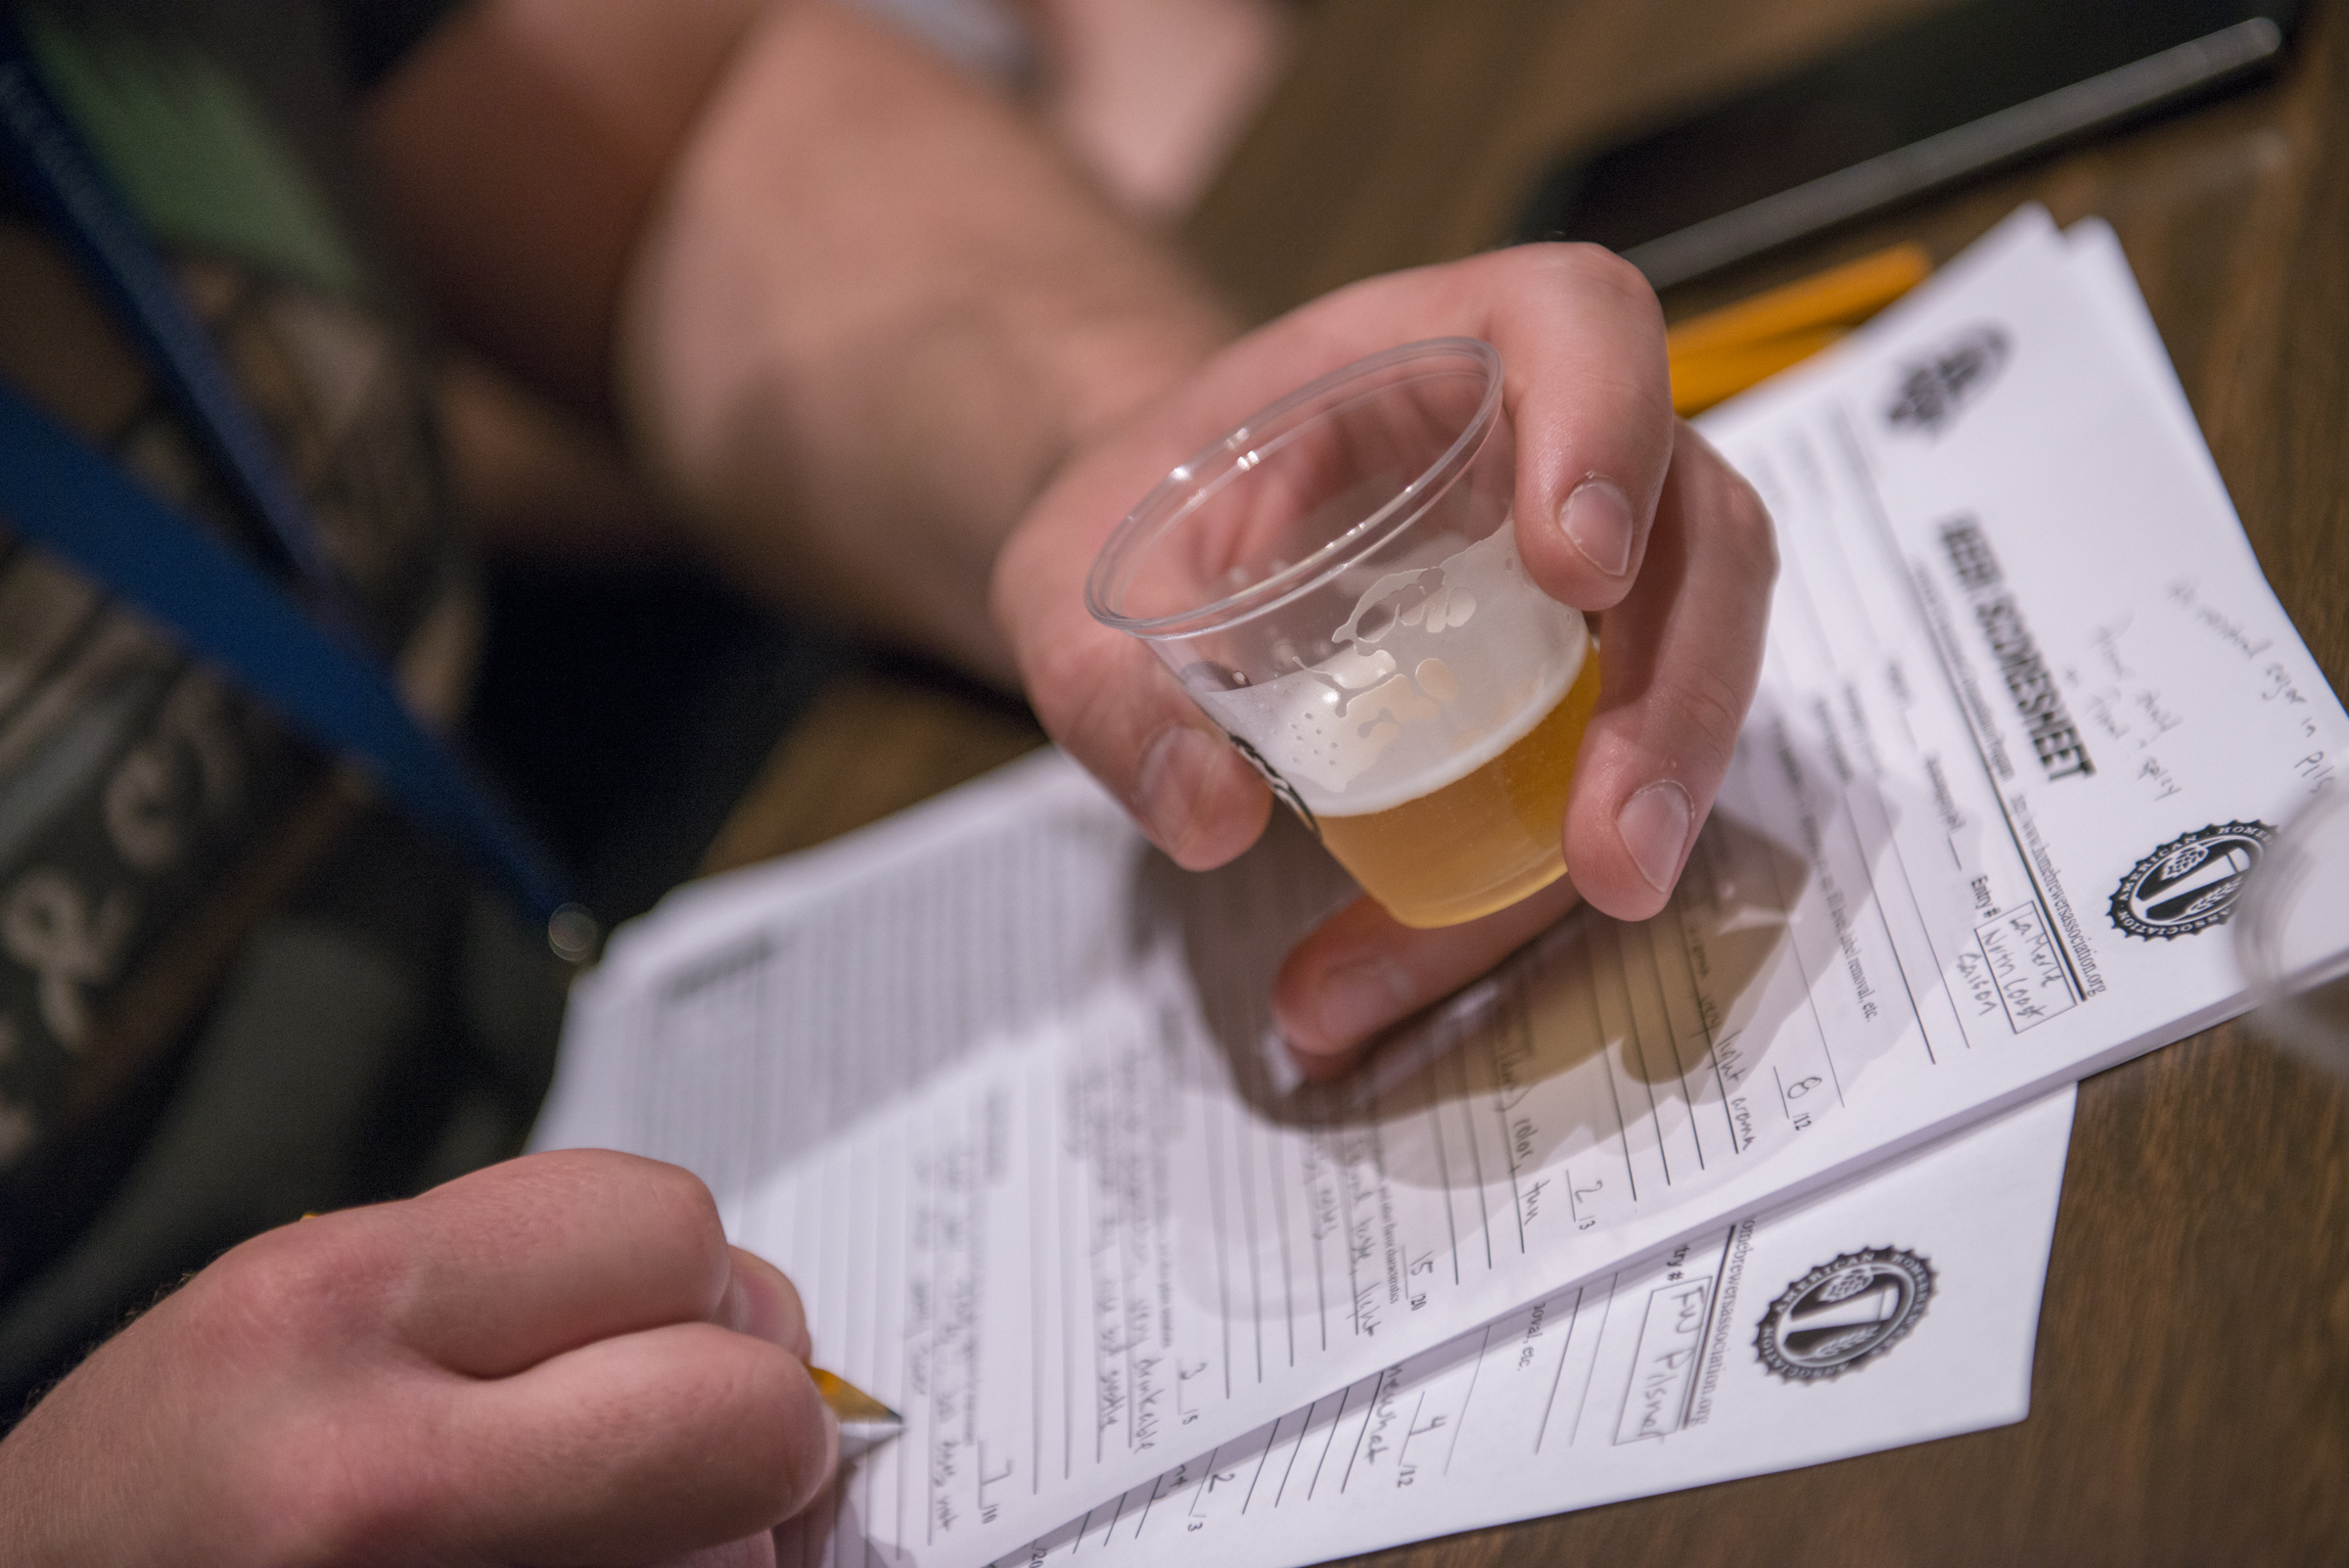 2017 California Craft Brewing Industry Compensation Study Now Open for Participation